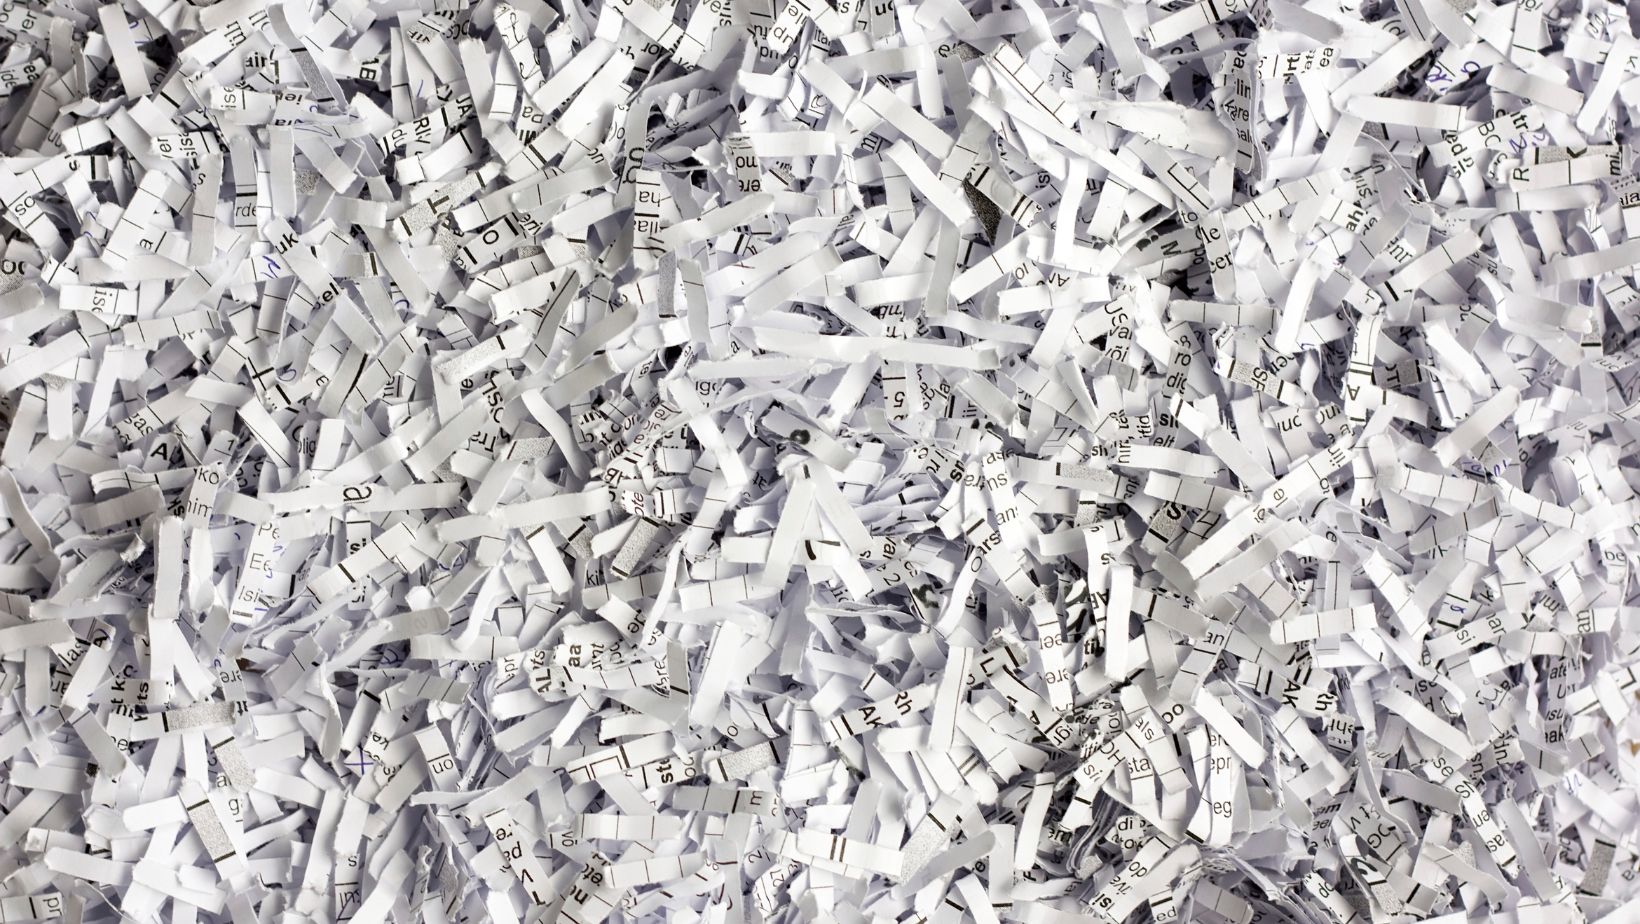 The Advantages of Using Document Shredding Services this New Year